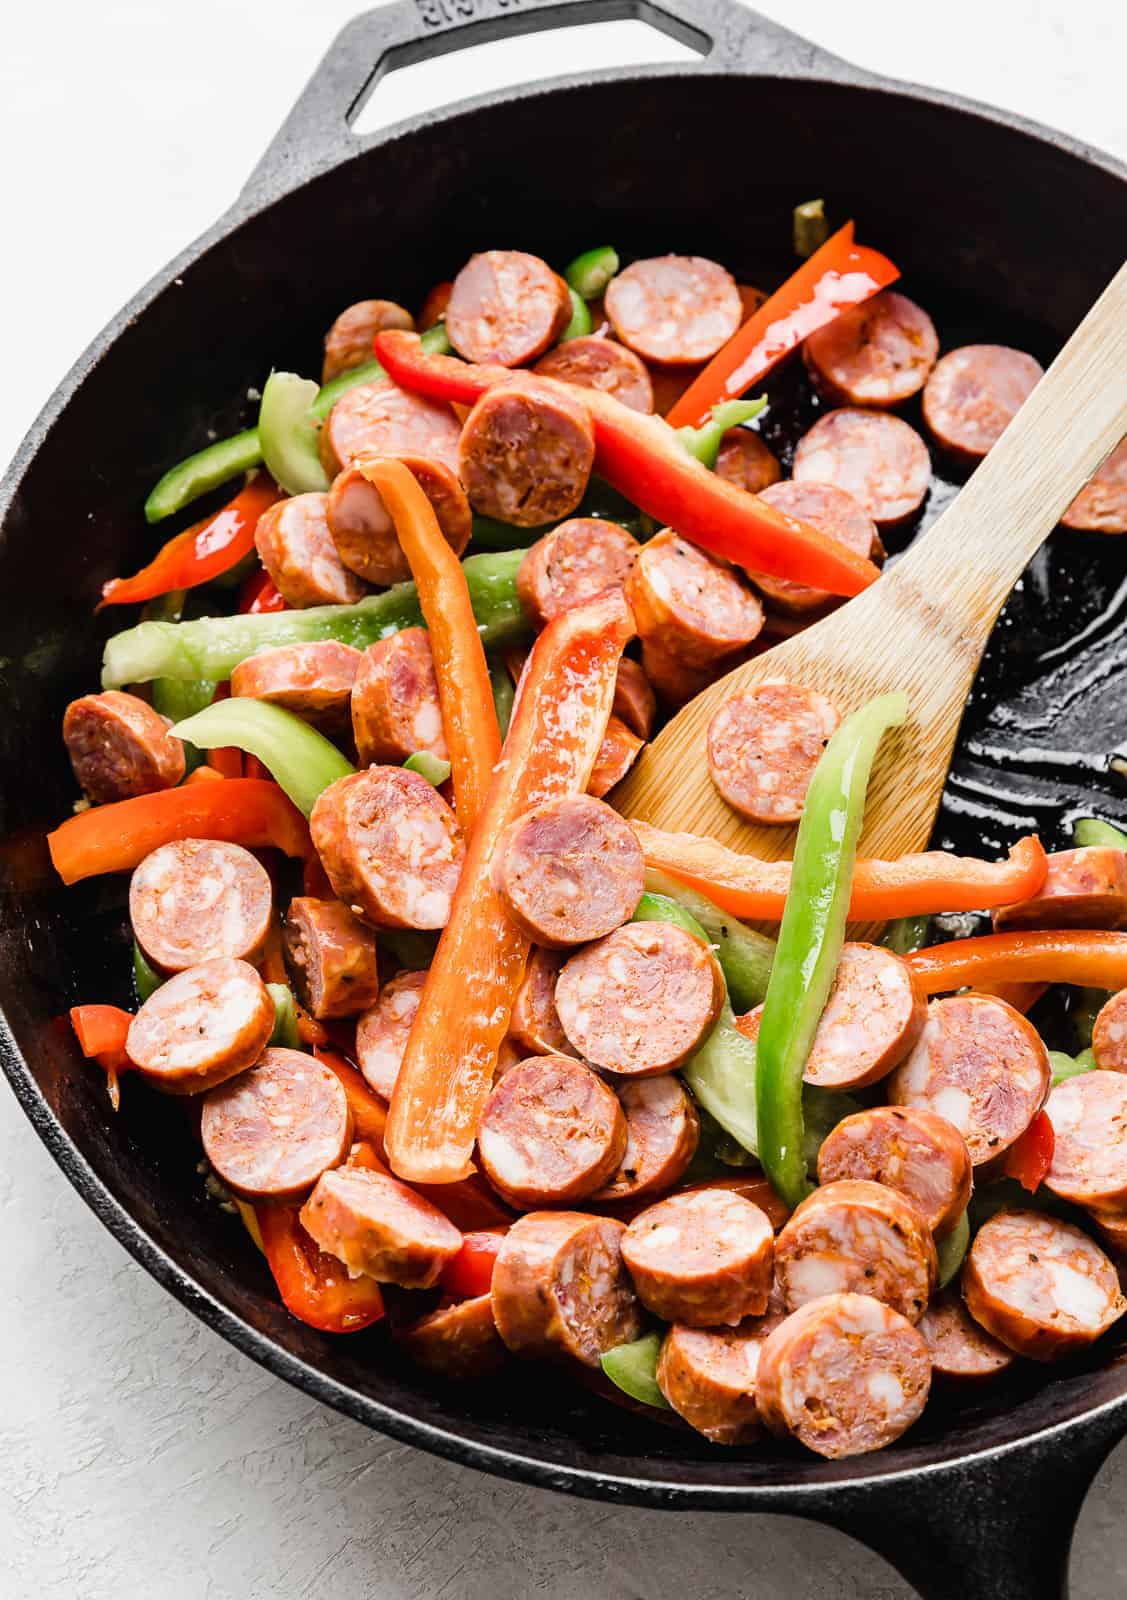 A black skillet with red and green sliced peppers and sliced sausages in it.